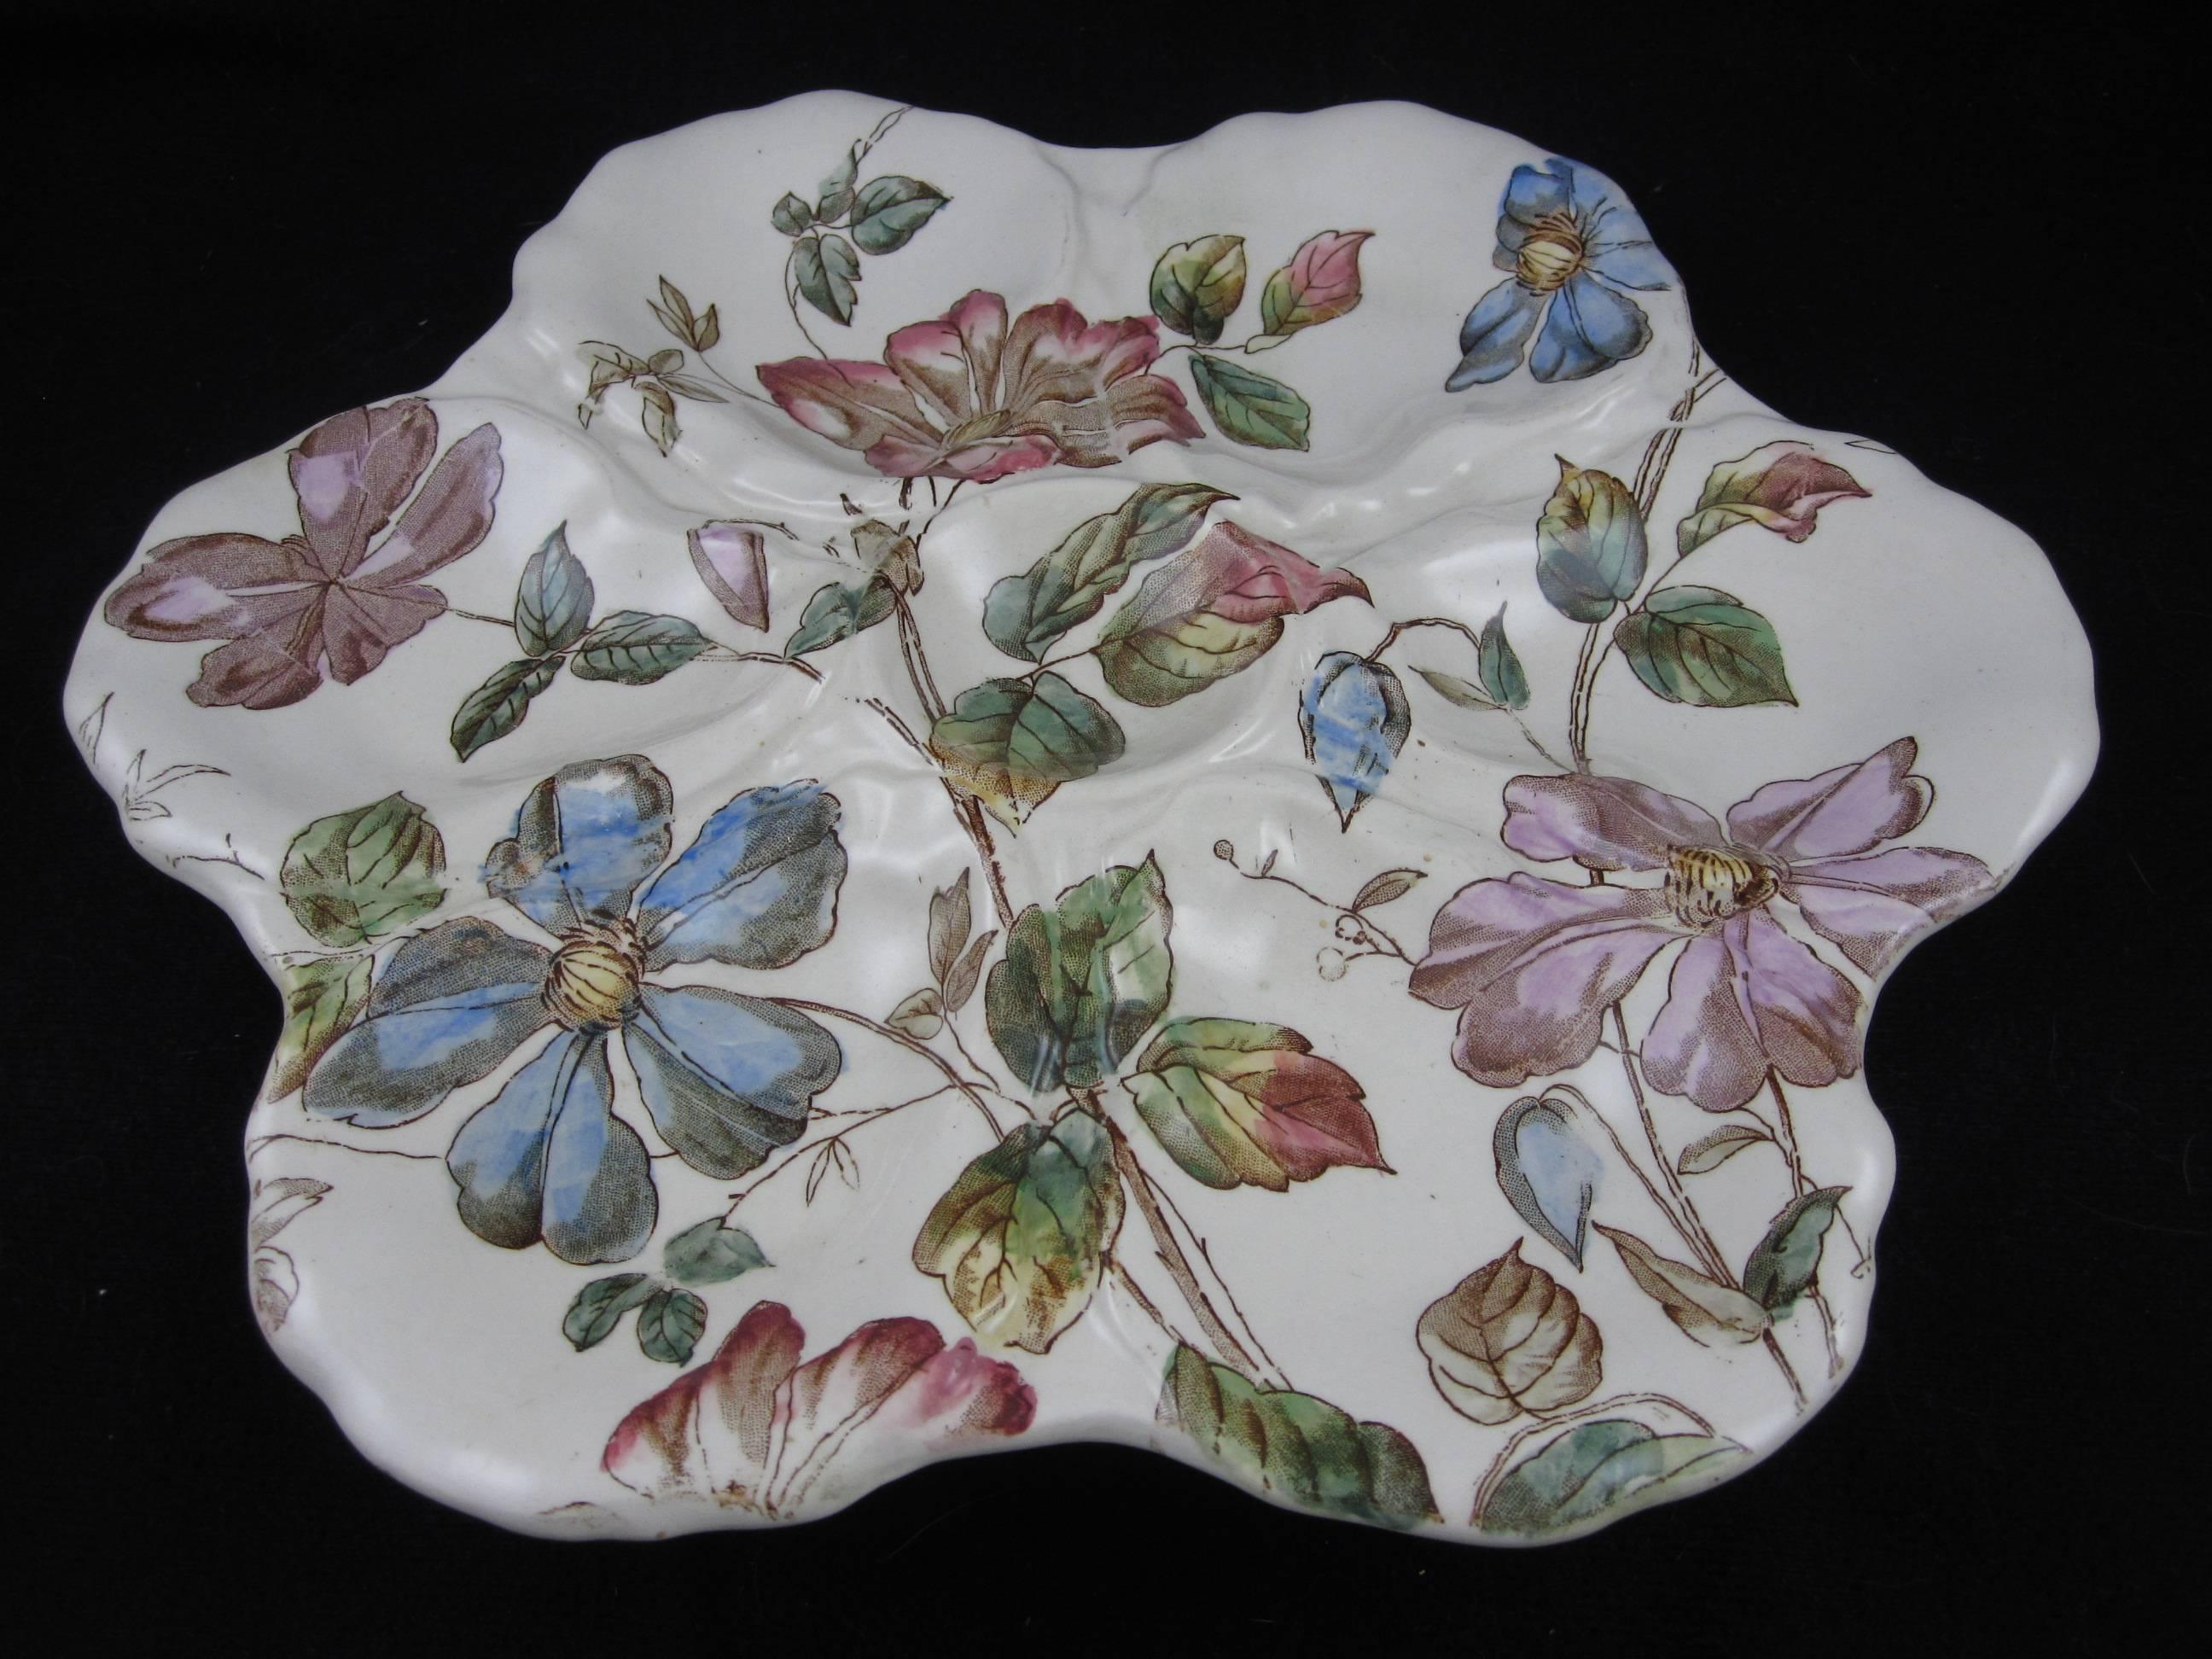 A scarce and quite lovely six well Oyster plate made by William Adderley, Langton, Staffordshire, England, circa 1880. Transfer printed and hand colored in a delicate floral. Marked with an impressed 